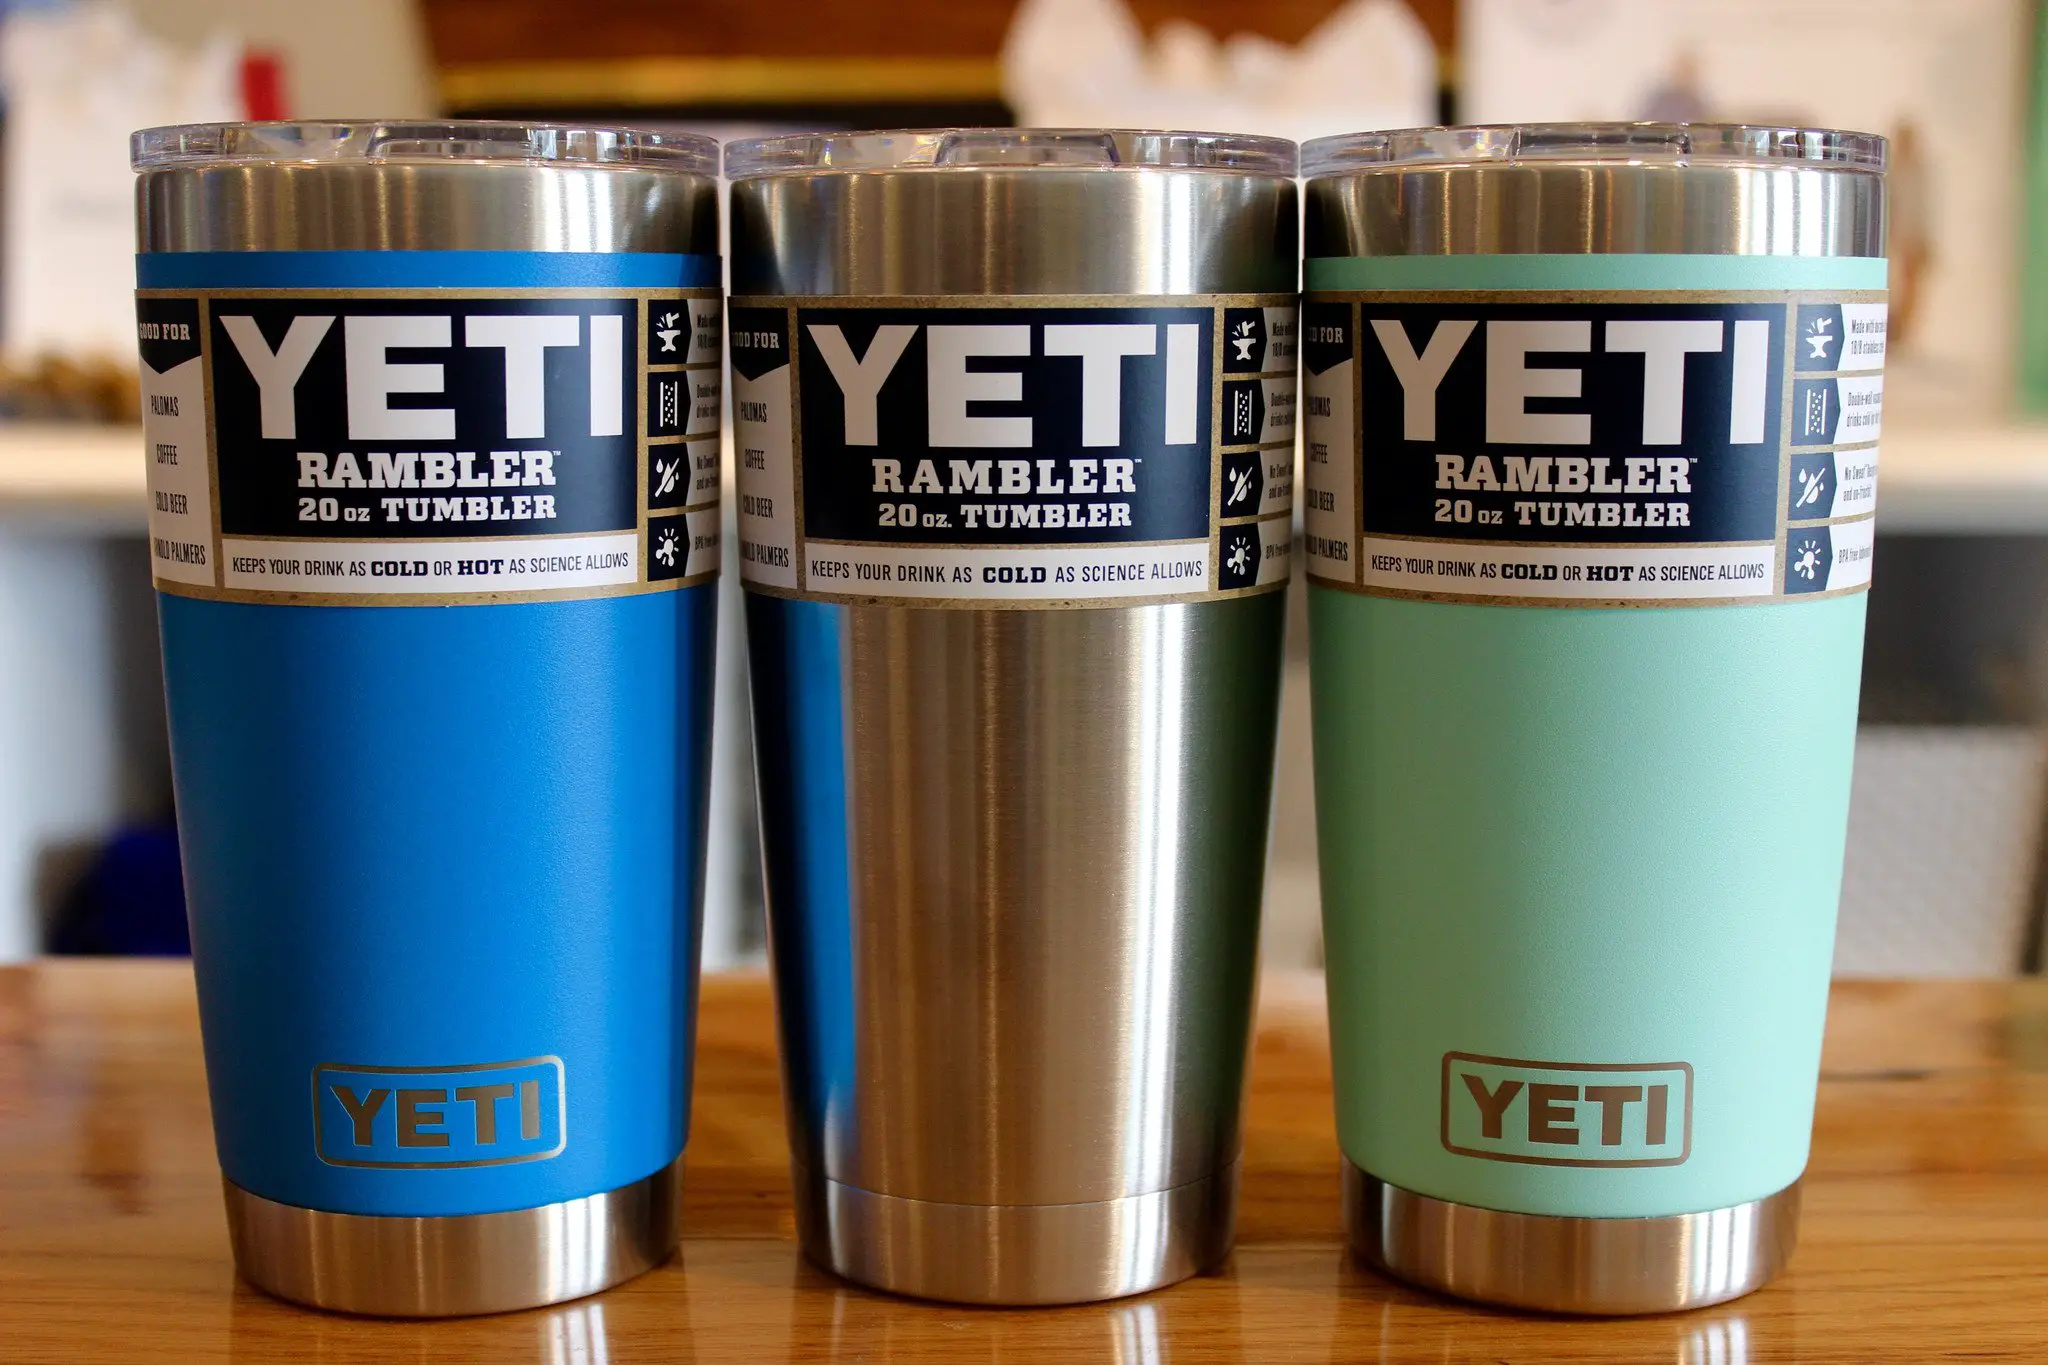 Play the Coca-Cola Yeti Tumbler Instant Win Game for your chance to win one of 250 A Coca-Cola branded 30 oz. Yeti® Rambler Tumblers